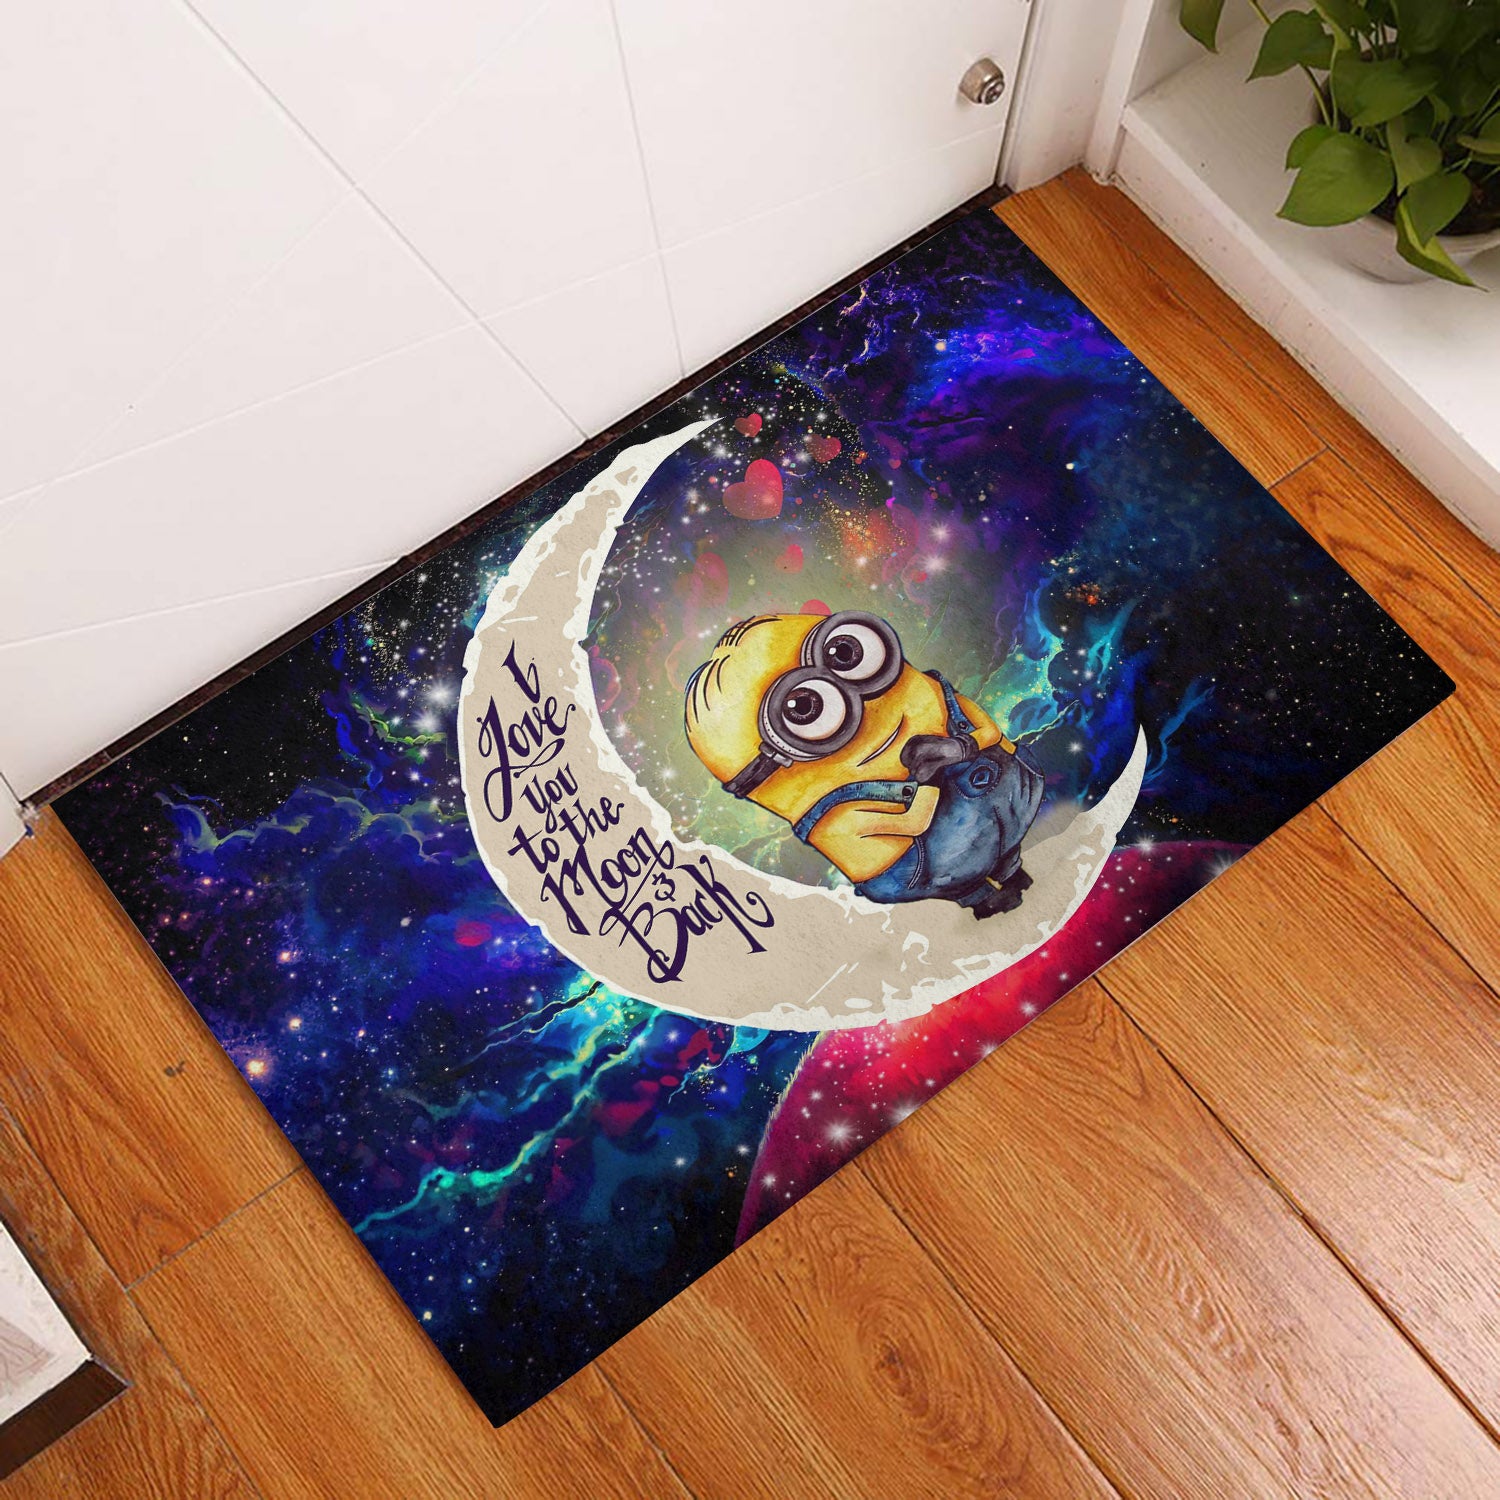 Cute Minions Despicable Me Love You To The Moon Galaxy Back Door Mats Home Decor